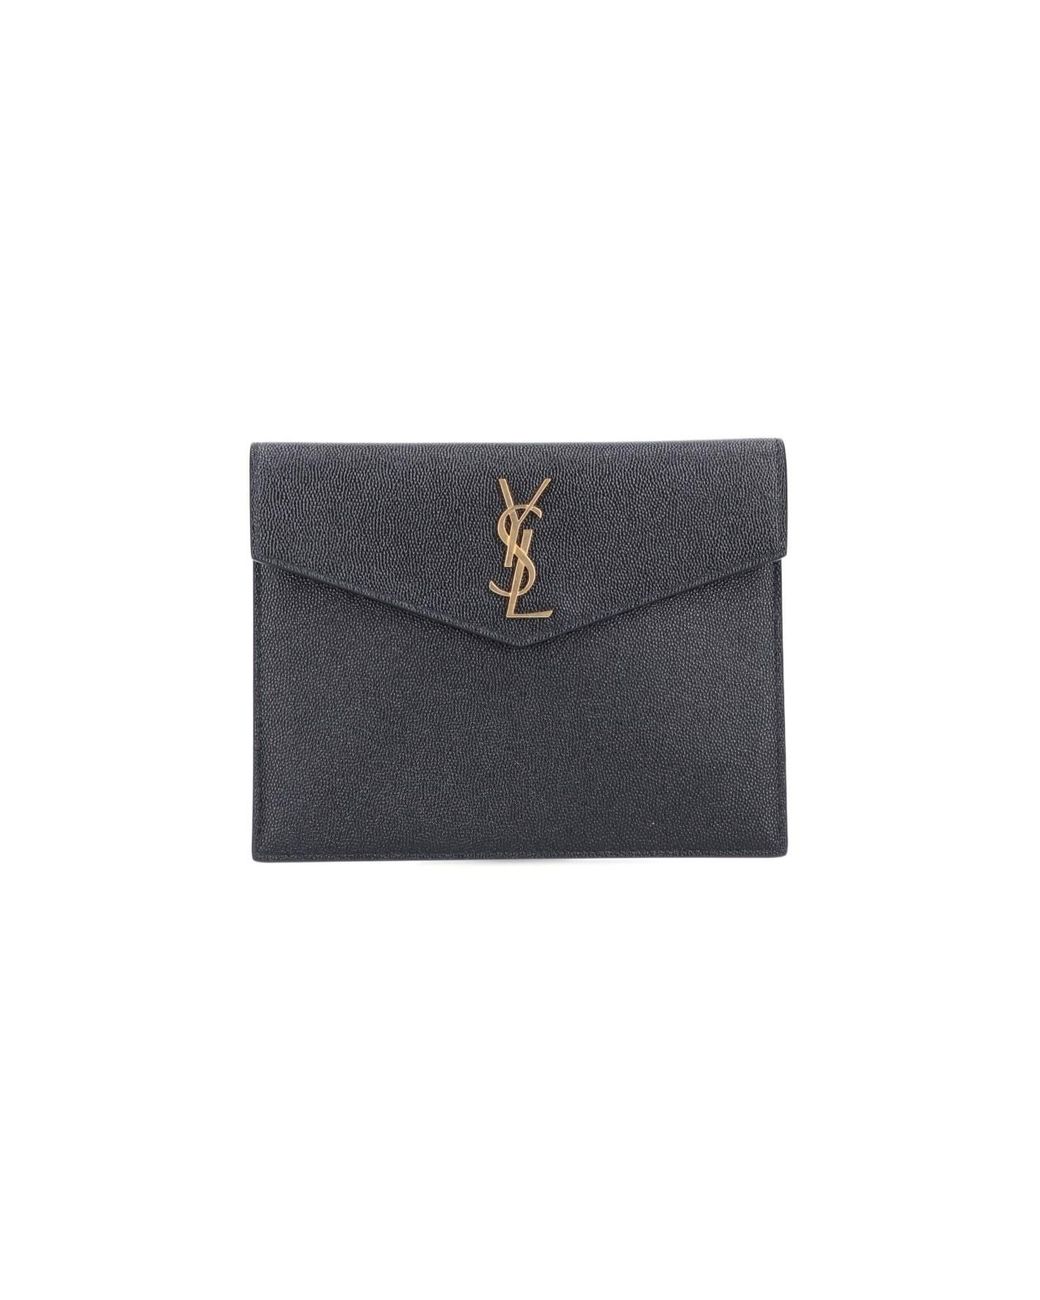 Saint Laurent Uptown Pebbled Leather Pouch in Nero